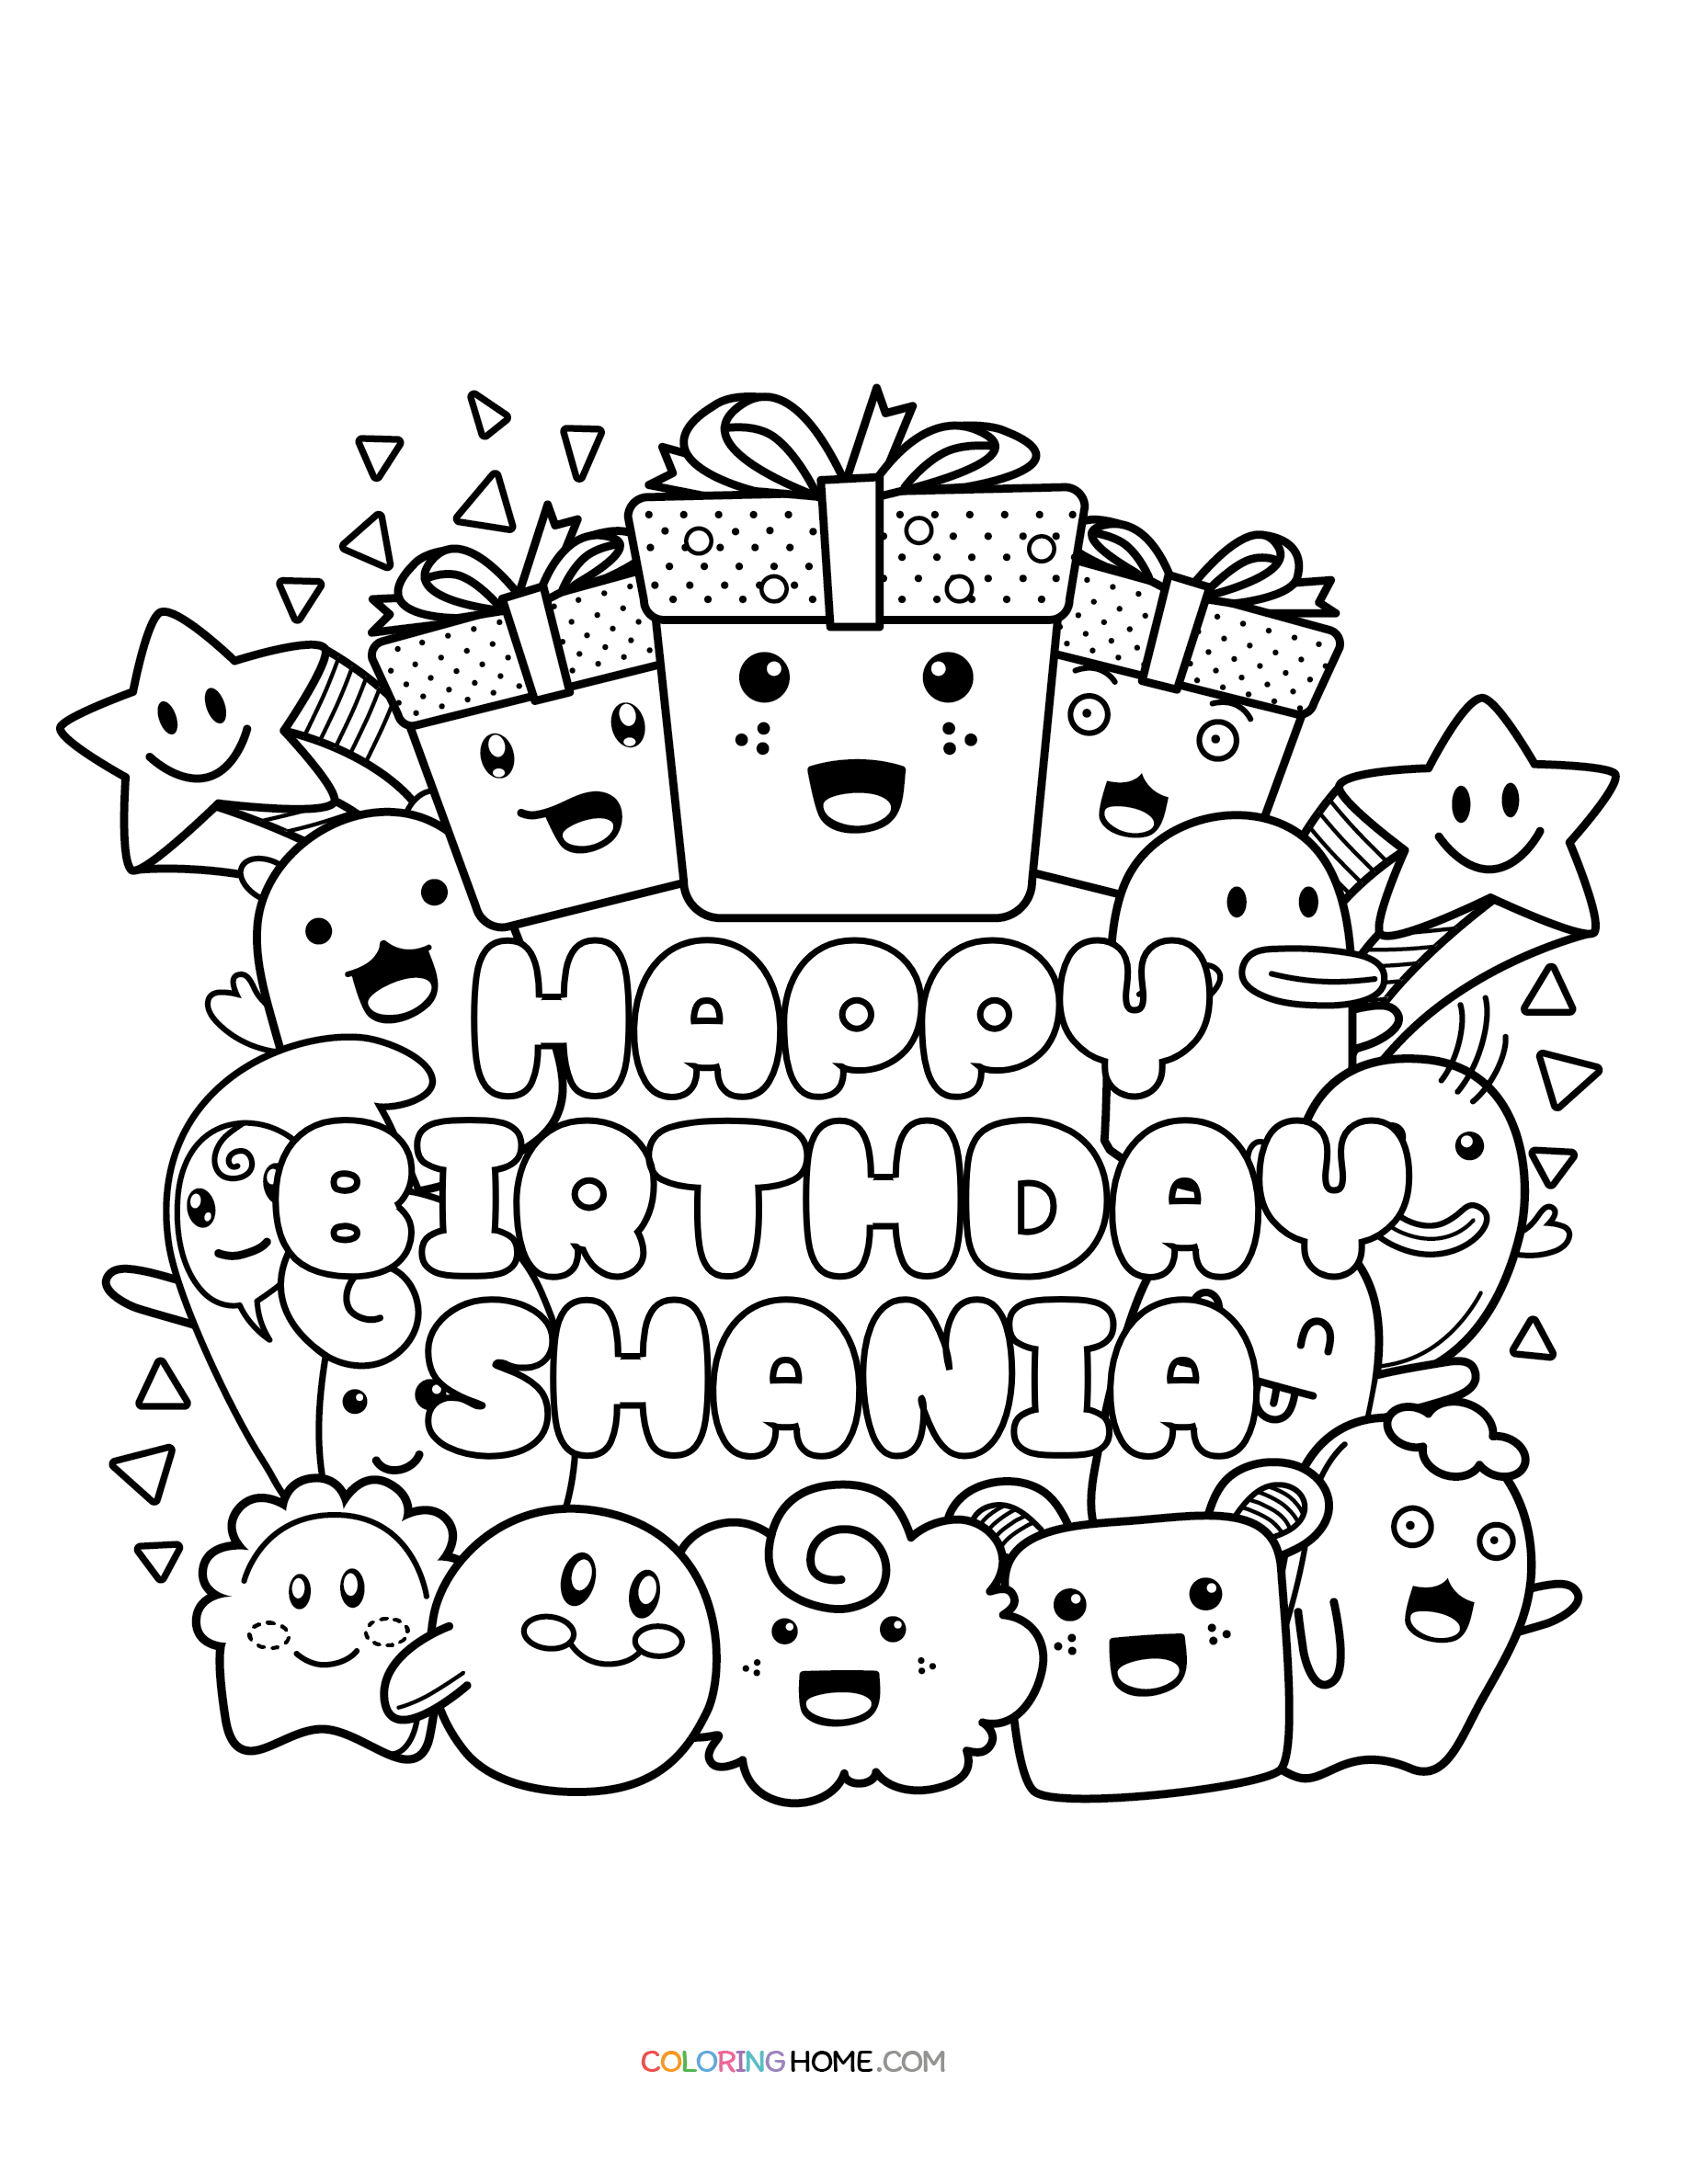 Happy Birthday Shania coloring page